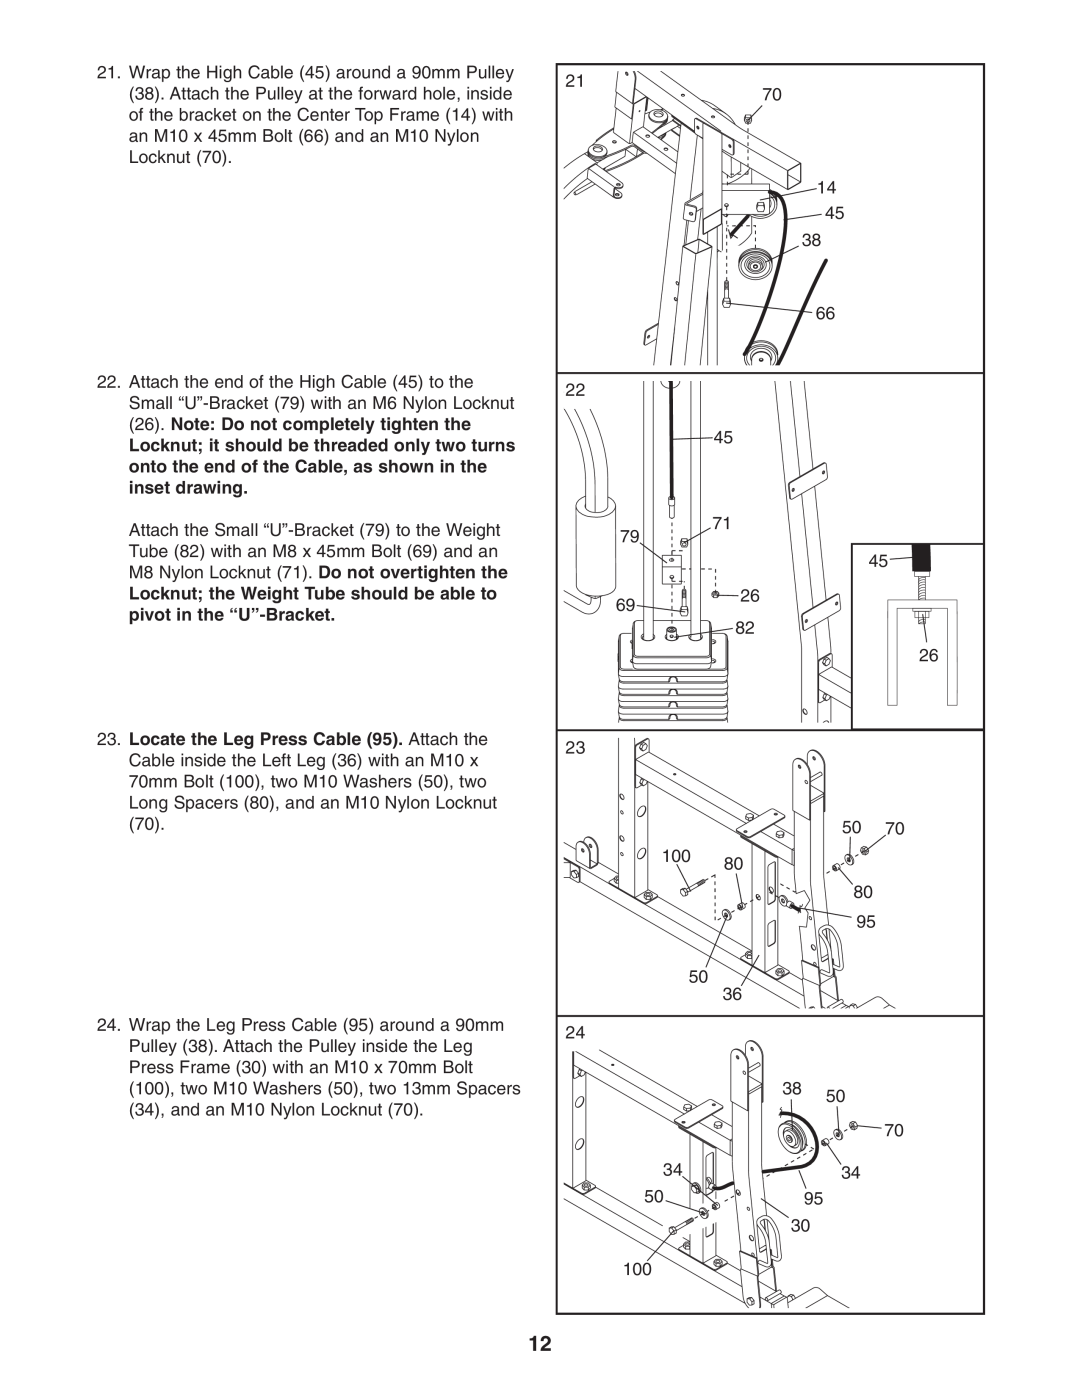 Weider 831.159822 user manual Locknut the Weight Tube should be able to pivot in the “U”-Bracket 